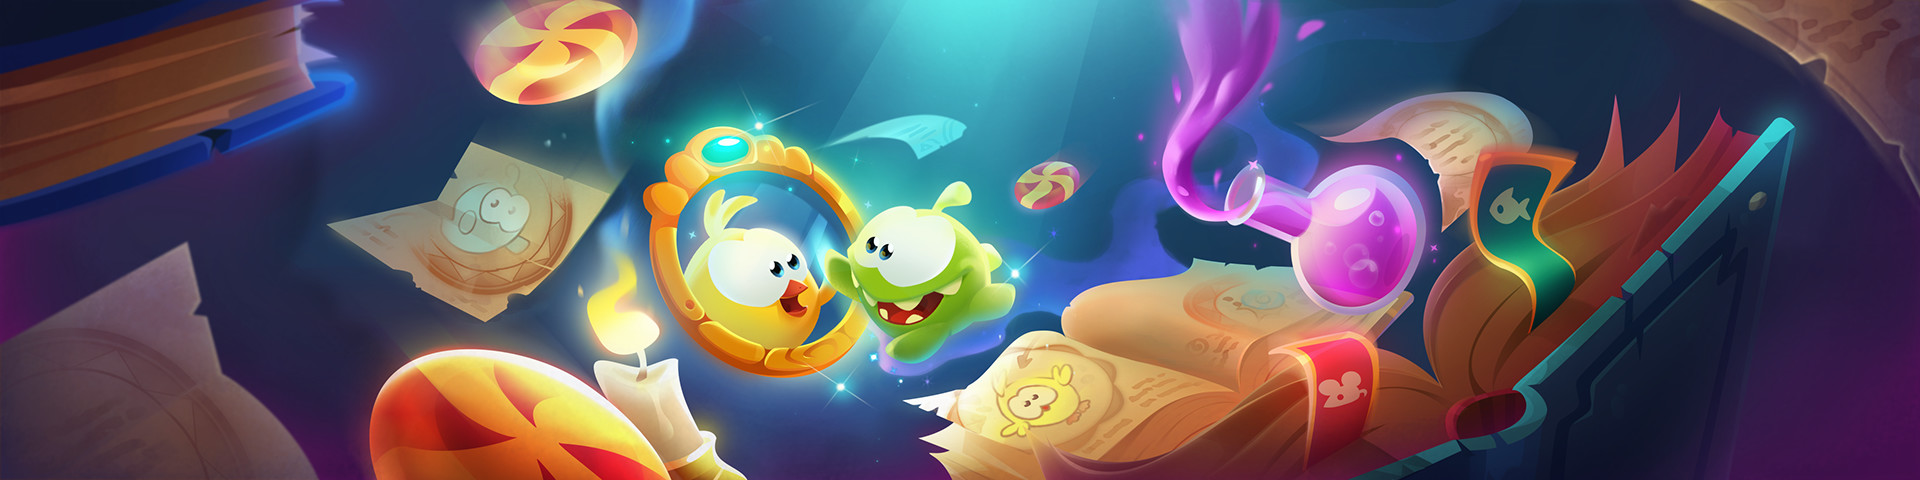 ArtStation - I've been playing Cut the Rope - Magic since 2-3 days